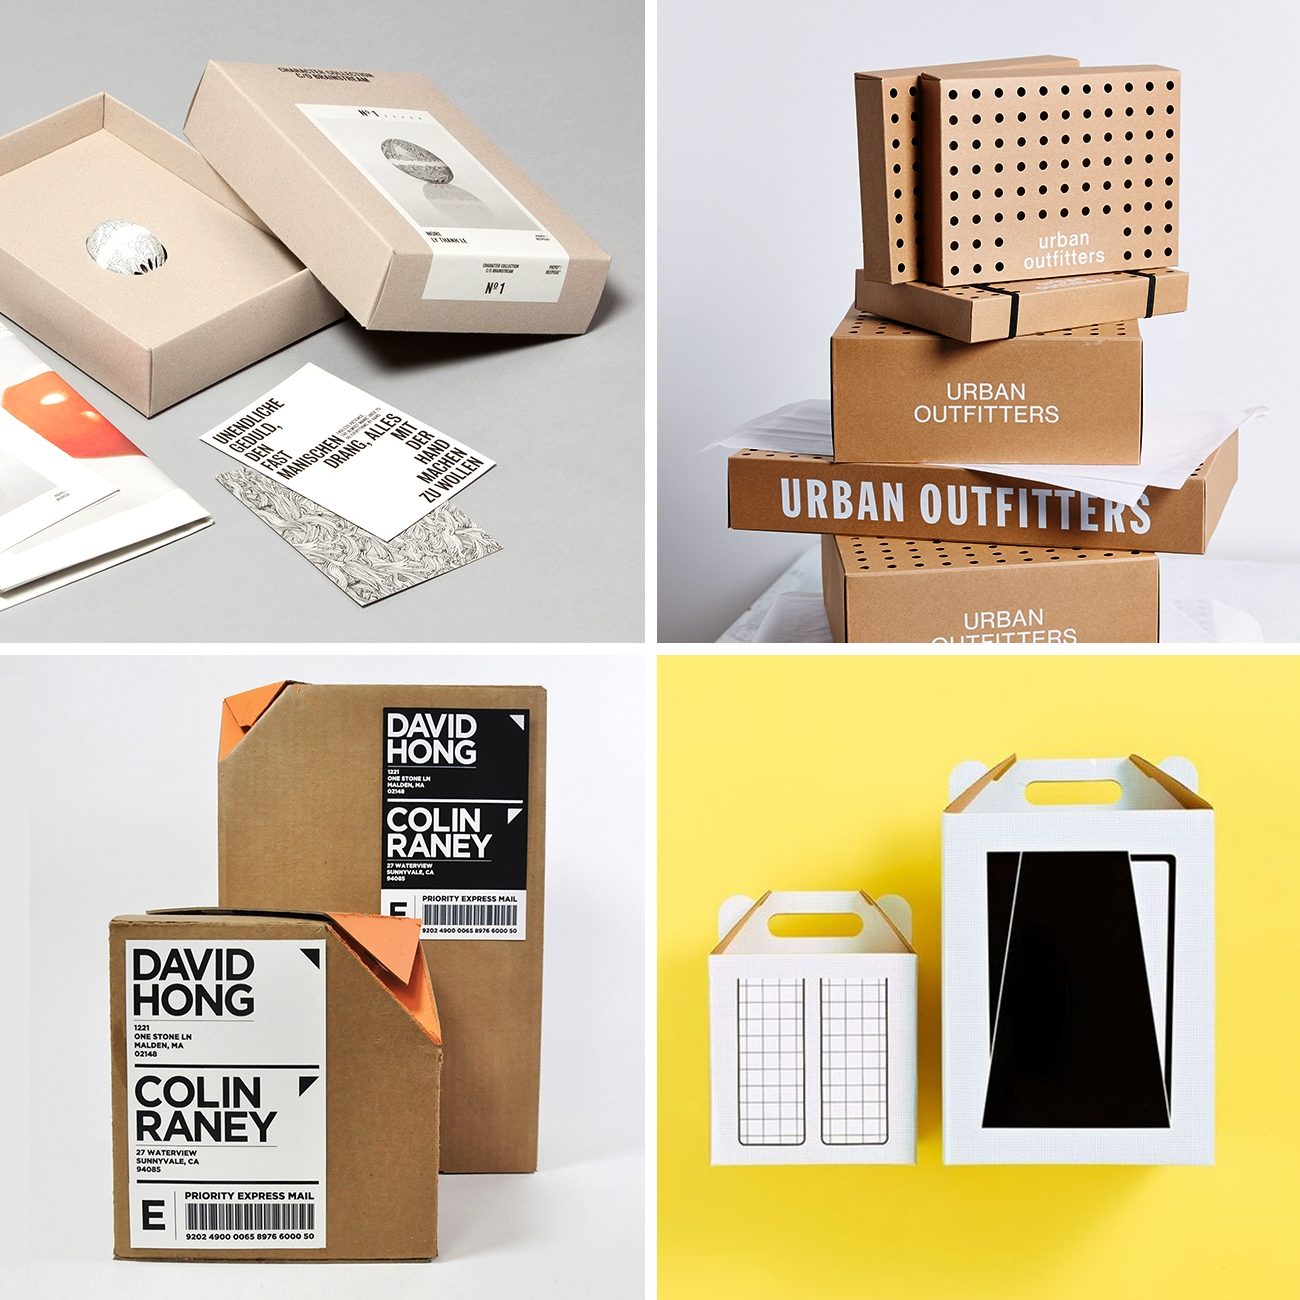 Photos via: A Practice for Everyday Life, Gabriel Klein, Ian Rousey, Chen Chen Hu, Allison Henry Aver 90 Ideas to Spruce Up Your Holiday Packaging Design